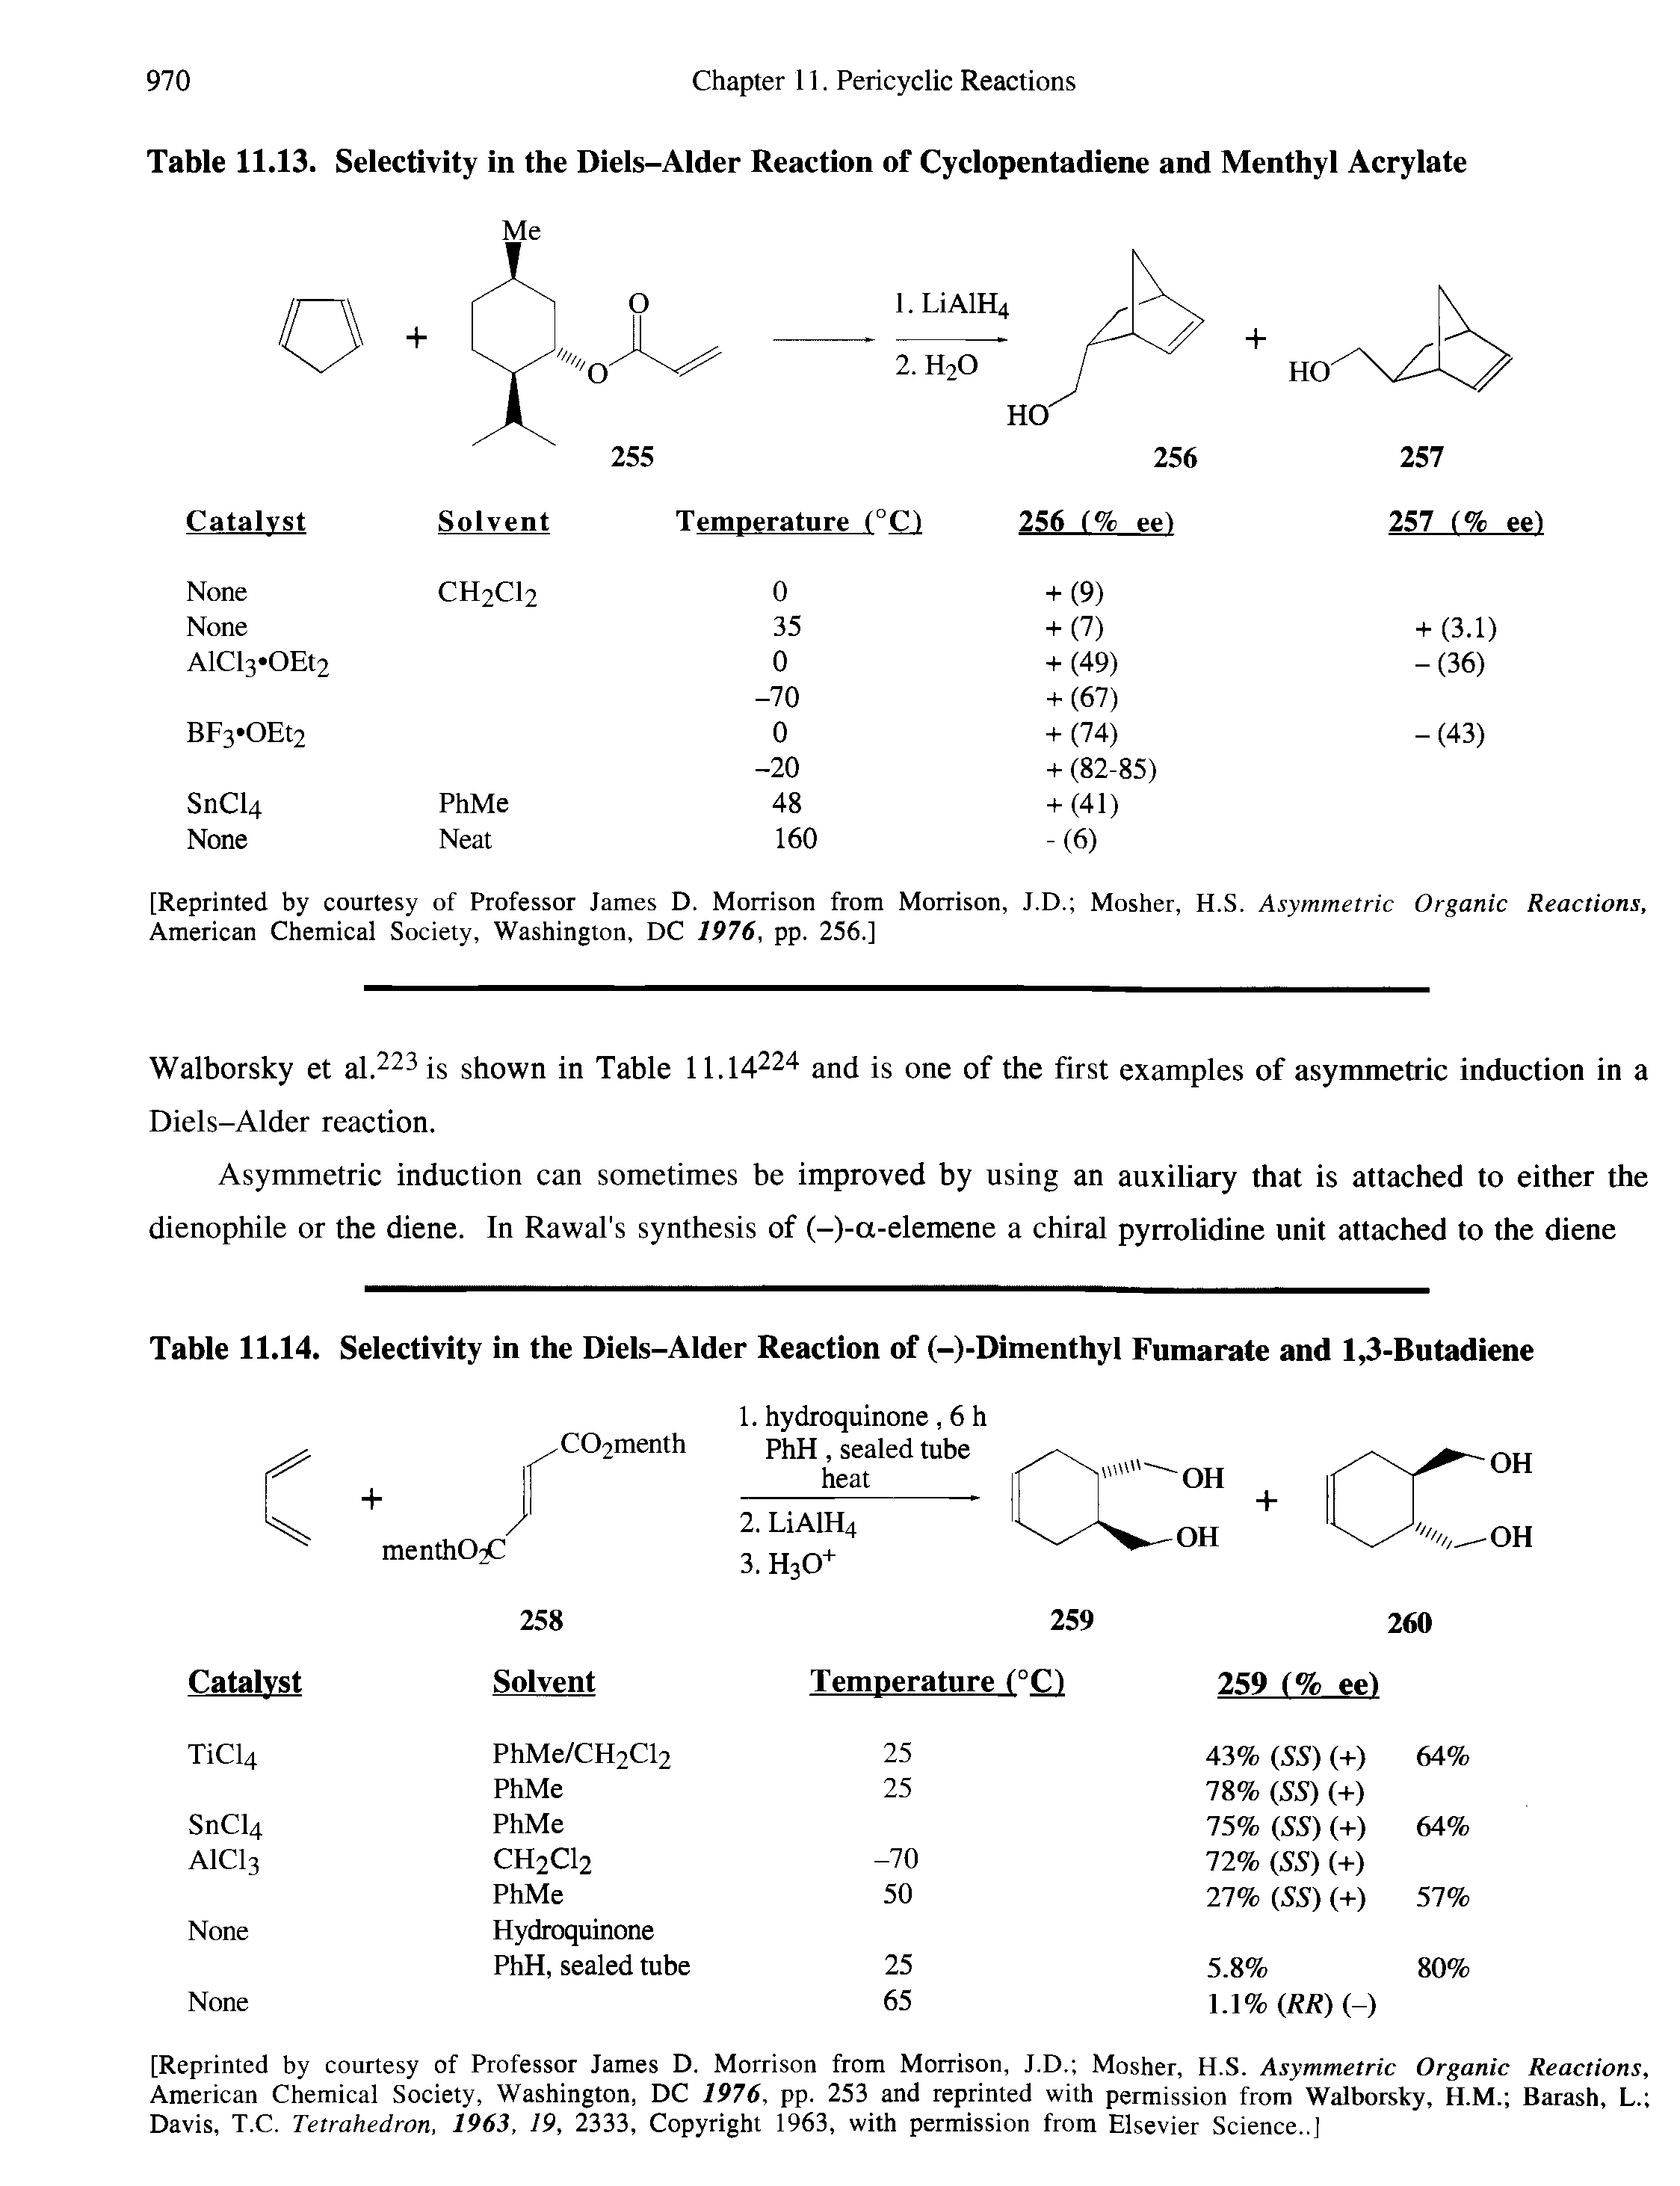 Table 11.13. Selectivity in the Diels-Alder Reaction of Cyclopentadiene and Menthyl Acrylate...